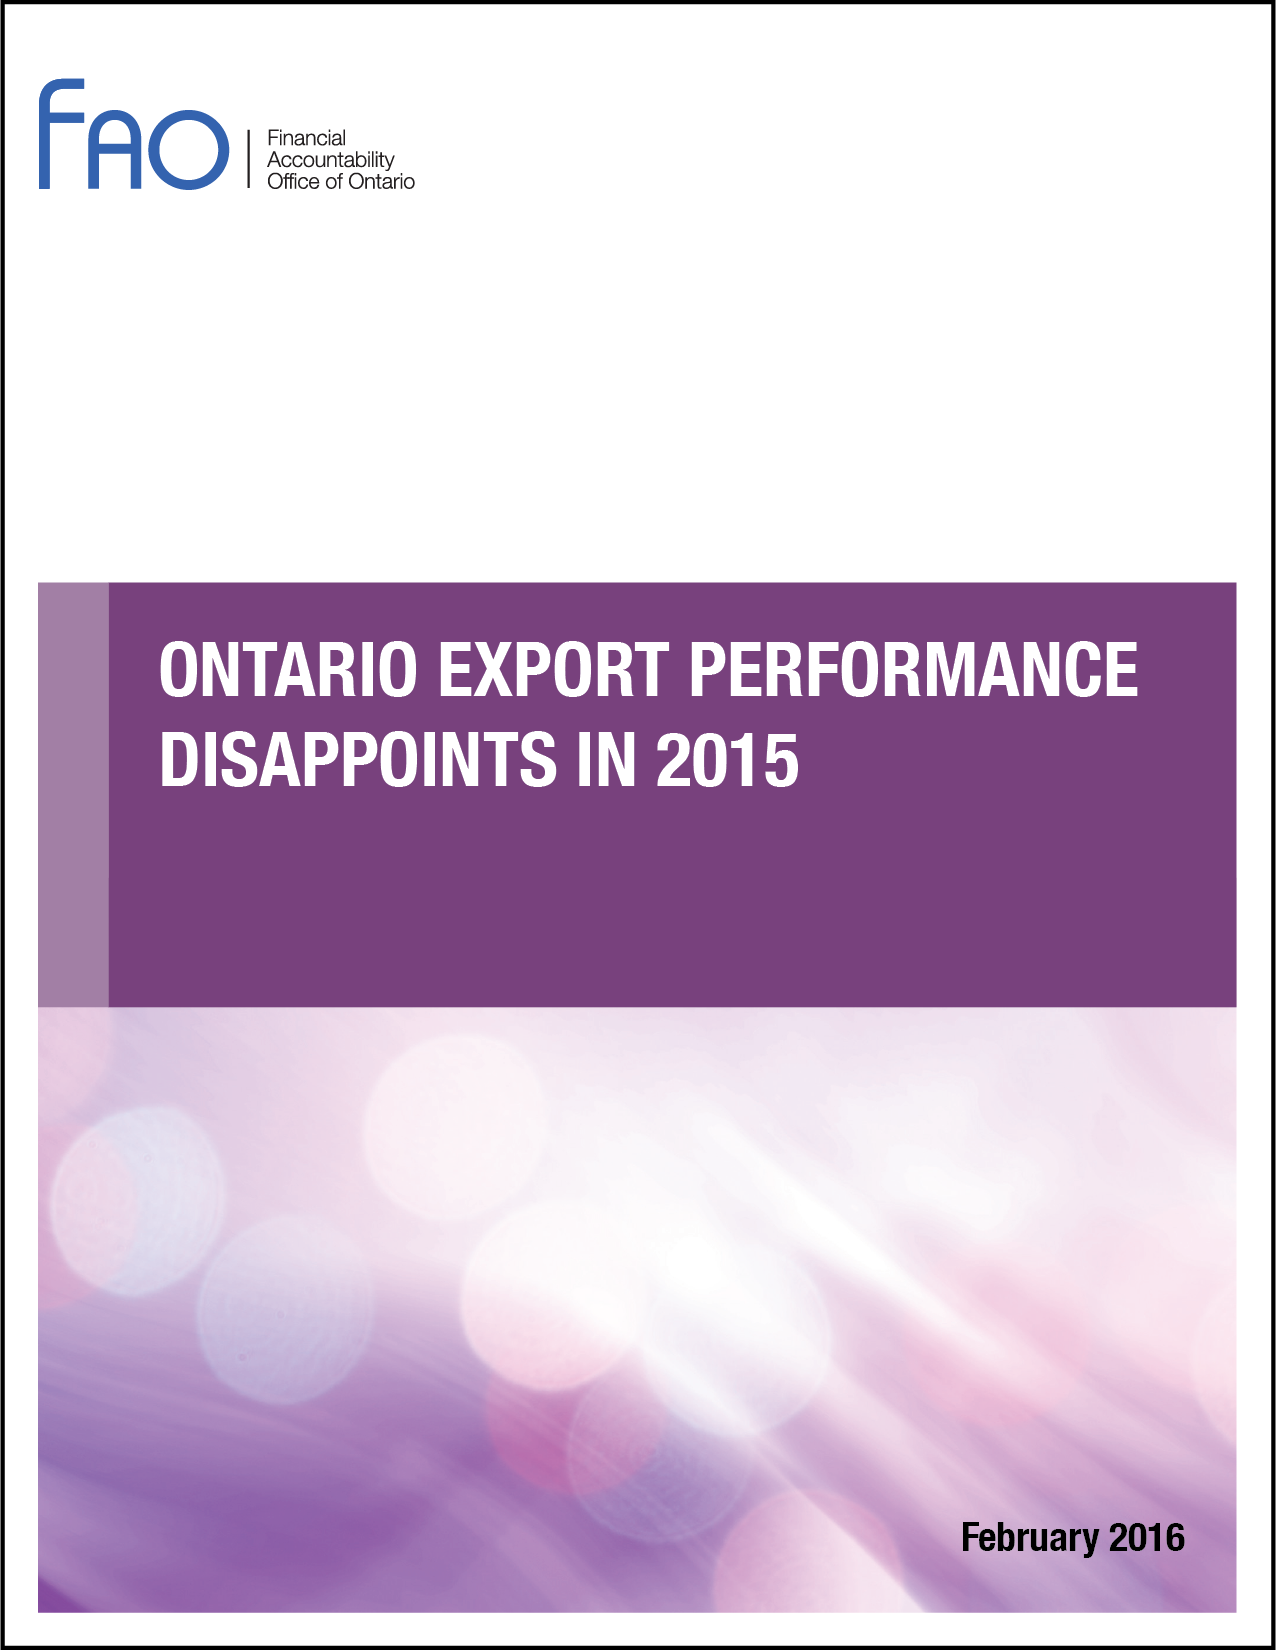 Ontario Export Performance Disappoints in 2015